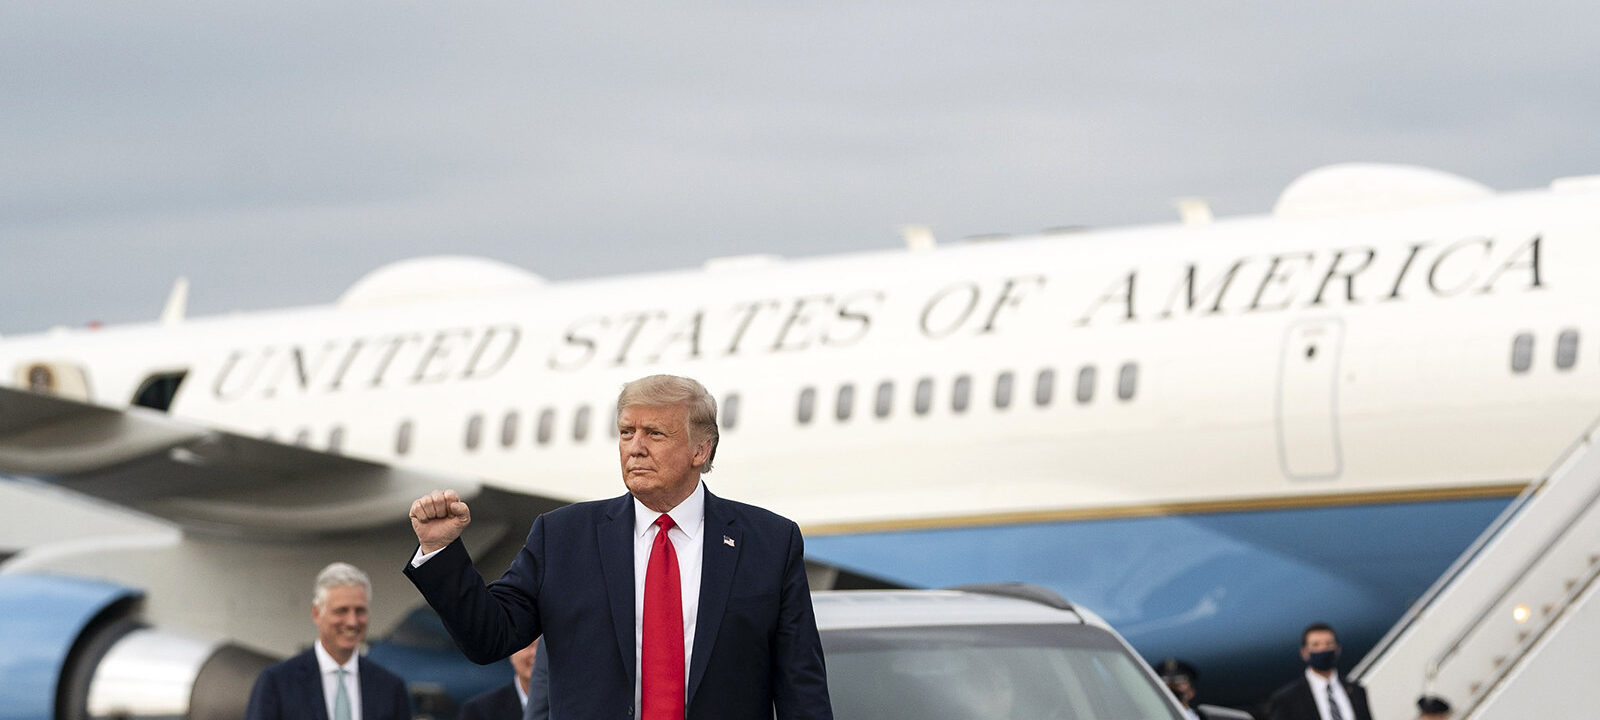 President Trump with Air Force One